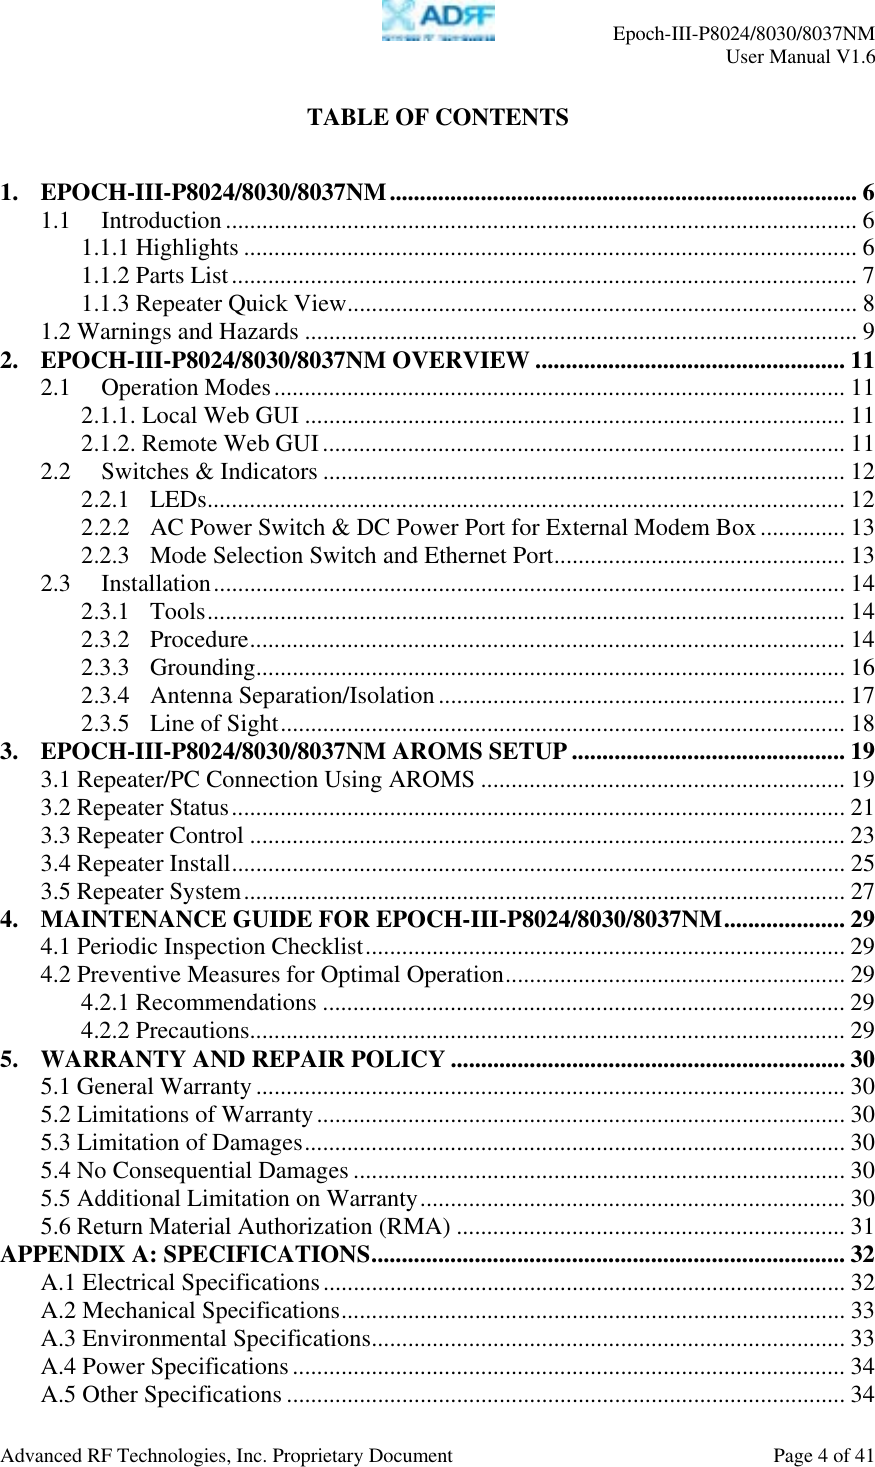     Epoch-III-P8024/8030/8037NM  User Manual V1.6  Advanced RF Technologies, Inc. Proprietary Document  Page 4 of 41  TABLE OF CONTENTS   1. EPOCH-III-P8024/8030/8037NM............................................................................. 6 1.1 Introduction ........................................................................................................ 6 1.1.1 Highlights ..................................................................................................... 6 1.1.2 Parts List....................................................................................................... 7 1.1.3 Repeater Quick View.................................................................................... 8 1.2 Warnings and Hazards ........................................................................................... 9 2. EPOCH-III-P8024/8030/8037NM OVERVIEW ................................................... 11 2.1 Operation Modes.............................................................................................. 11 2.1.1. Local Web GUI ......................................................................................... 11 2.1.2. Remote Web GUI...................................................................................... 11 2.2 Switches &amp; Indicators ...................................................................................... 12 2.2.1 LEDs......................................................................................................... 12 2.2.2 AC Power Switch &amp; DC Power Port for External Modem Box.............. 13 2.2.3 Mode Selection Switch and Ethernet Port................................................ 13 2.3 Installation........................................................................................................ 14 2.3.1 Tools......................................................................................................... 14 2.3.2 Procedure.................................................................................................. 14 2.3.3 Grounding................................................................................................. 16 2.3.4 Antenna Separation/Isolation ................................................................... 17 2.3.5 Line of Sight............................................................................................. 18 3. EPOCH-III-P8024/8030/8037NM AROMS SETUP ............................................. 19 3.1 Repeater/PC Connection Using AROMS ............................................................ 19 3.2 Repeater Status..................................................................................................... 21 3.3 Repeater Control .................................................................................................. 23 3.4 Repeater Install..................................................................................................... 25 3.5 Repeater System................................................................................................... 27 4. MAINTENANCE GUIDE FOR EPOCH-III-P8024/8030/8037NM.................... 29 4.1 Periodic Inspection Checklist............................................................................... 29 4.2 Preventive Measures for Optimal Operation........................................................ 29 4.2.1 Recommendations ...................................................................................... 29 4.2.2 Precautions.................................................................................................. 29 5. WARRANTY AND REPAIR POLICY ................................................................. 30 5.1 General Warranty................................................................................................. 30 5.2 Limitations of Warranty....................................................................................... 30 5.3 Limitation of Damages......................................................................................... 30 5.4 No Consequential Damages ................................................................................. 30 5.5 Additional Limitation on Warranty...................................................................... 30 5.6 Return Material Authorization (RMA) ................................................................ 31 APPENDIX A: SPECIFICATIONS.............................................................................. 32 A.1 Electrical Specifications...................................................................................... 32 A.2 Mechanical Specifications................................................................................... 33 A.3 Environmental Specifications.............................................................................. 33 A.4 Power Specifications........................................................................................... 34 A.5 Other Specifications ............................................................................................ 34 